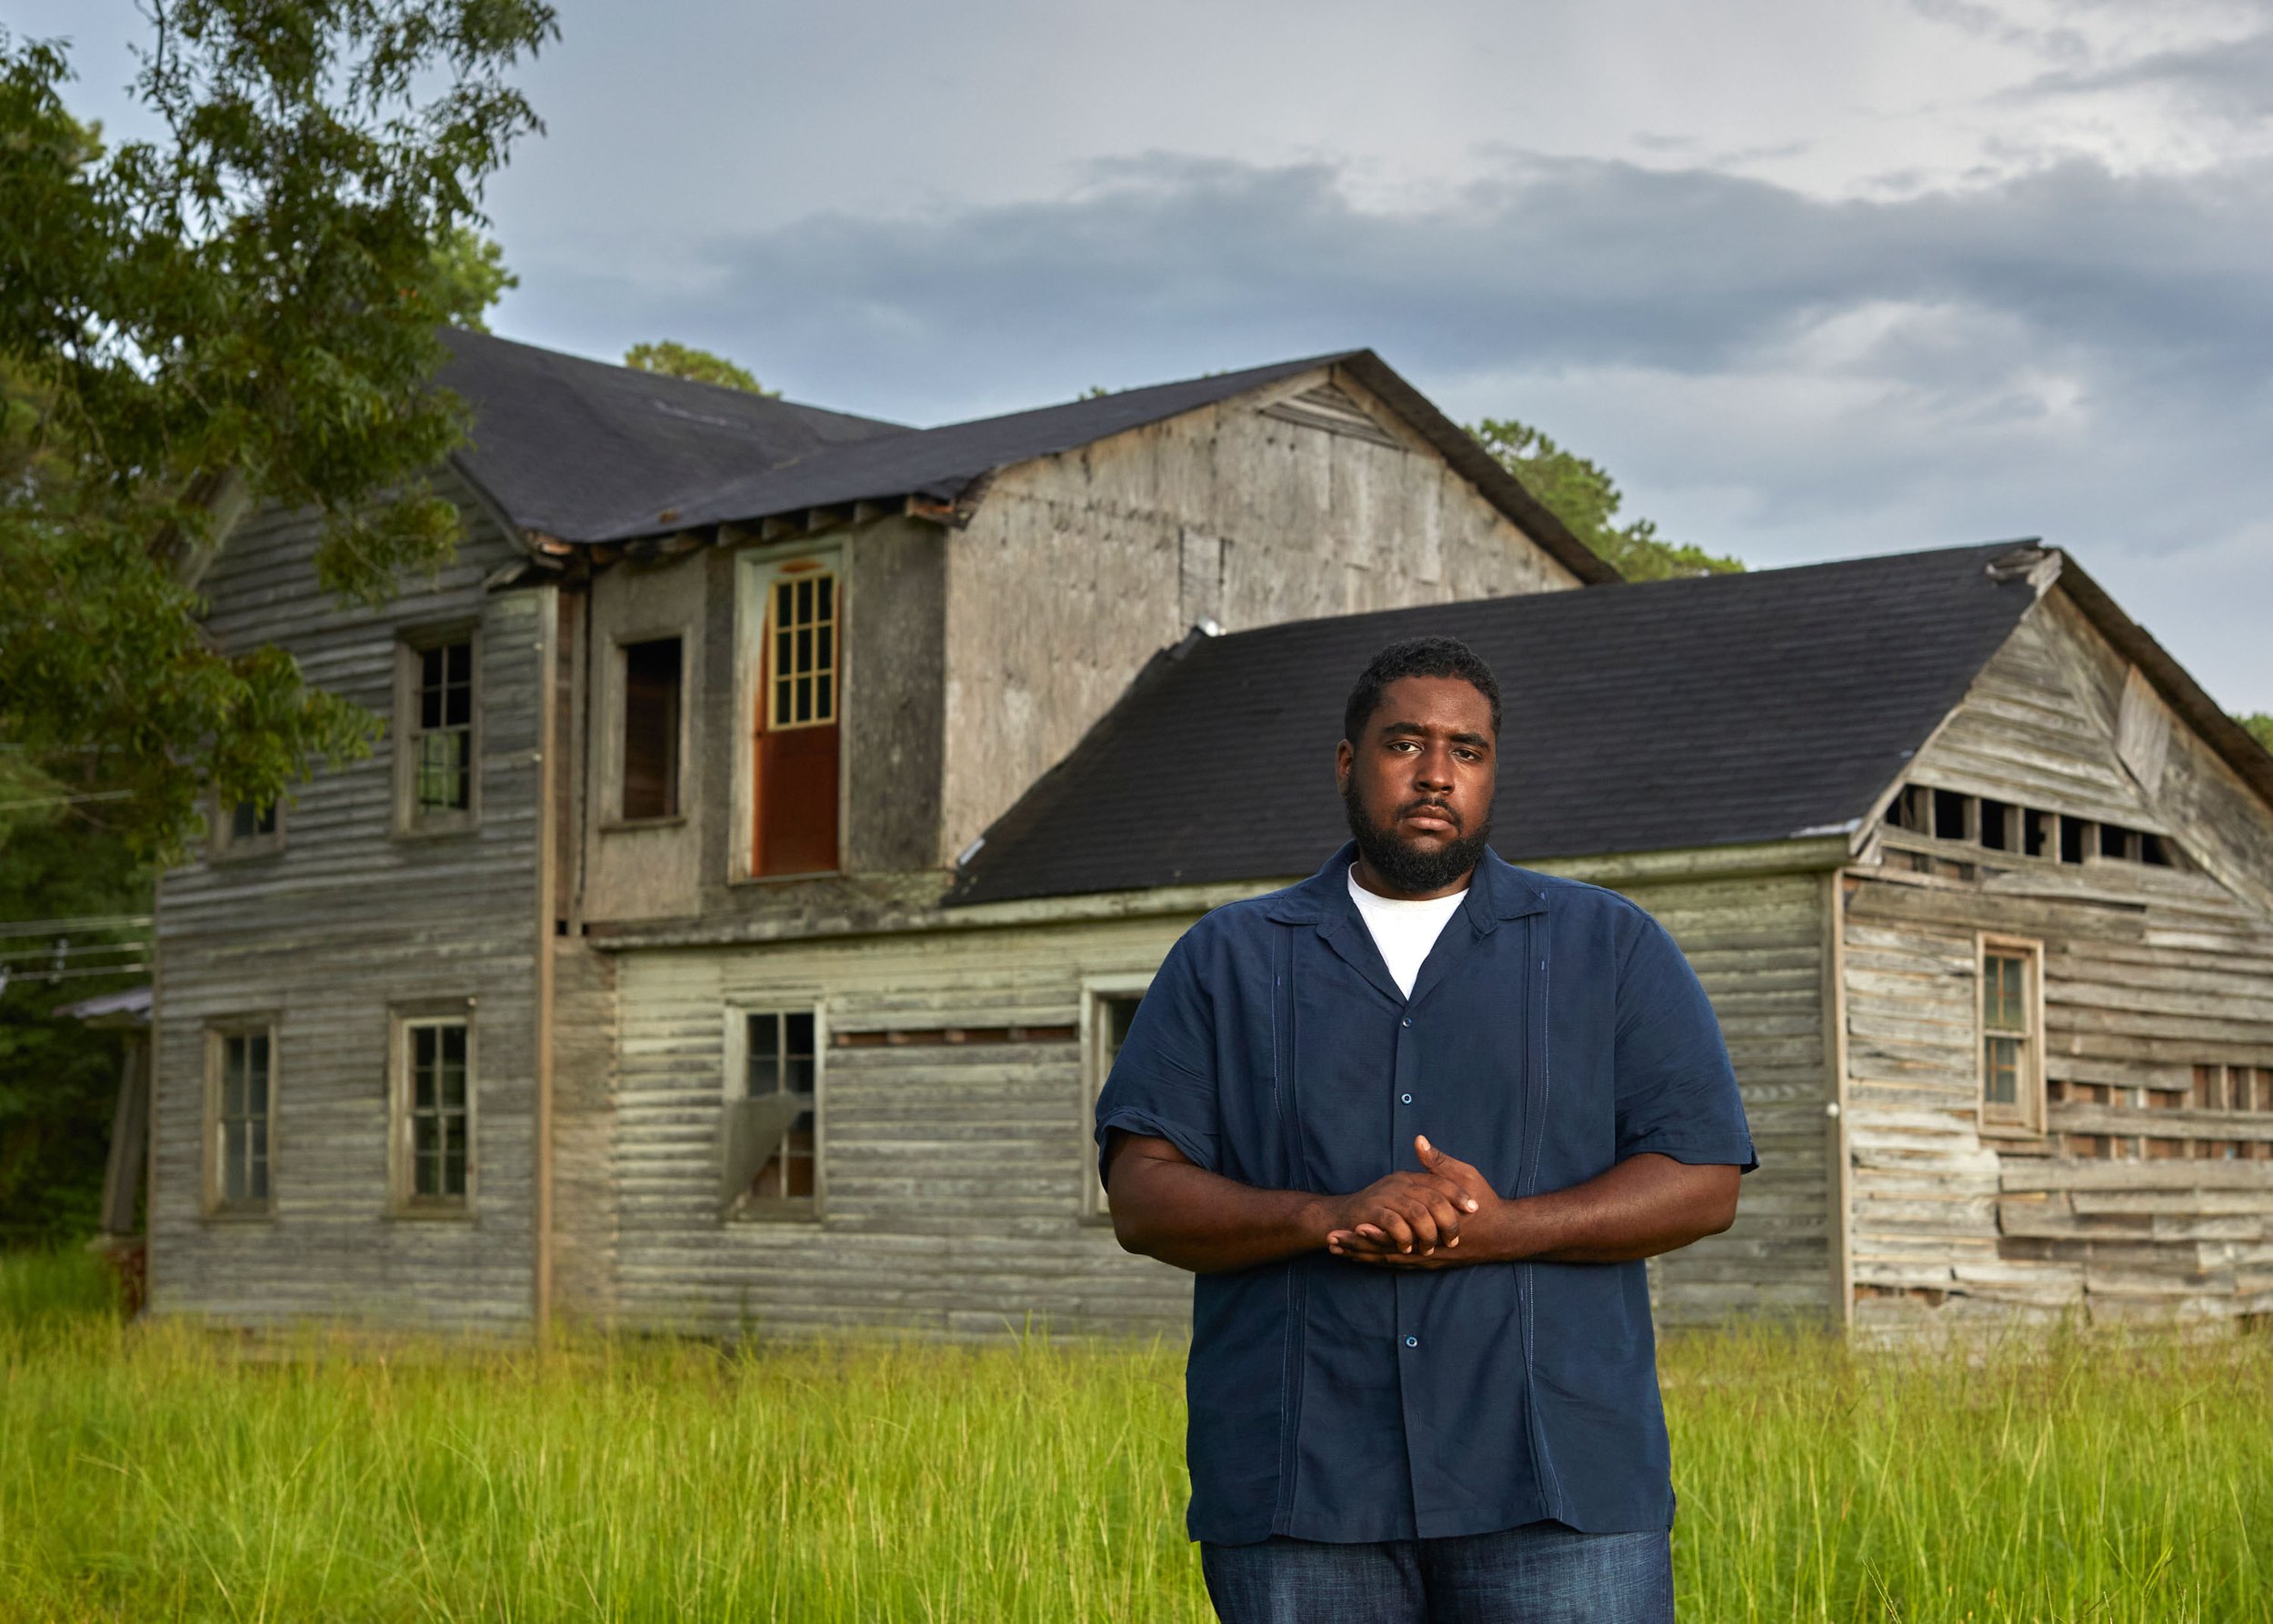  Climate advocate William Barber III who heads the Vera Brown Farm Project, the first sustainability hub for the @ruralbeaconinitiative in the Piney Woods community, a historic a tri-racial black, white and indigenous, community near Jamesville in ru